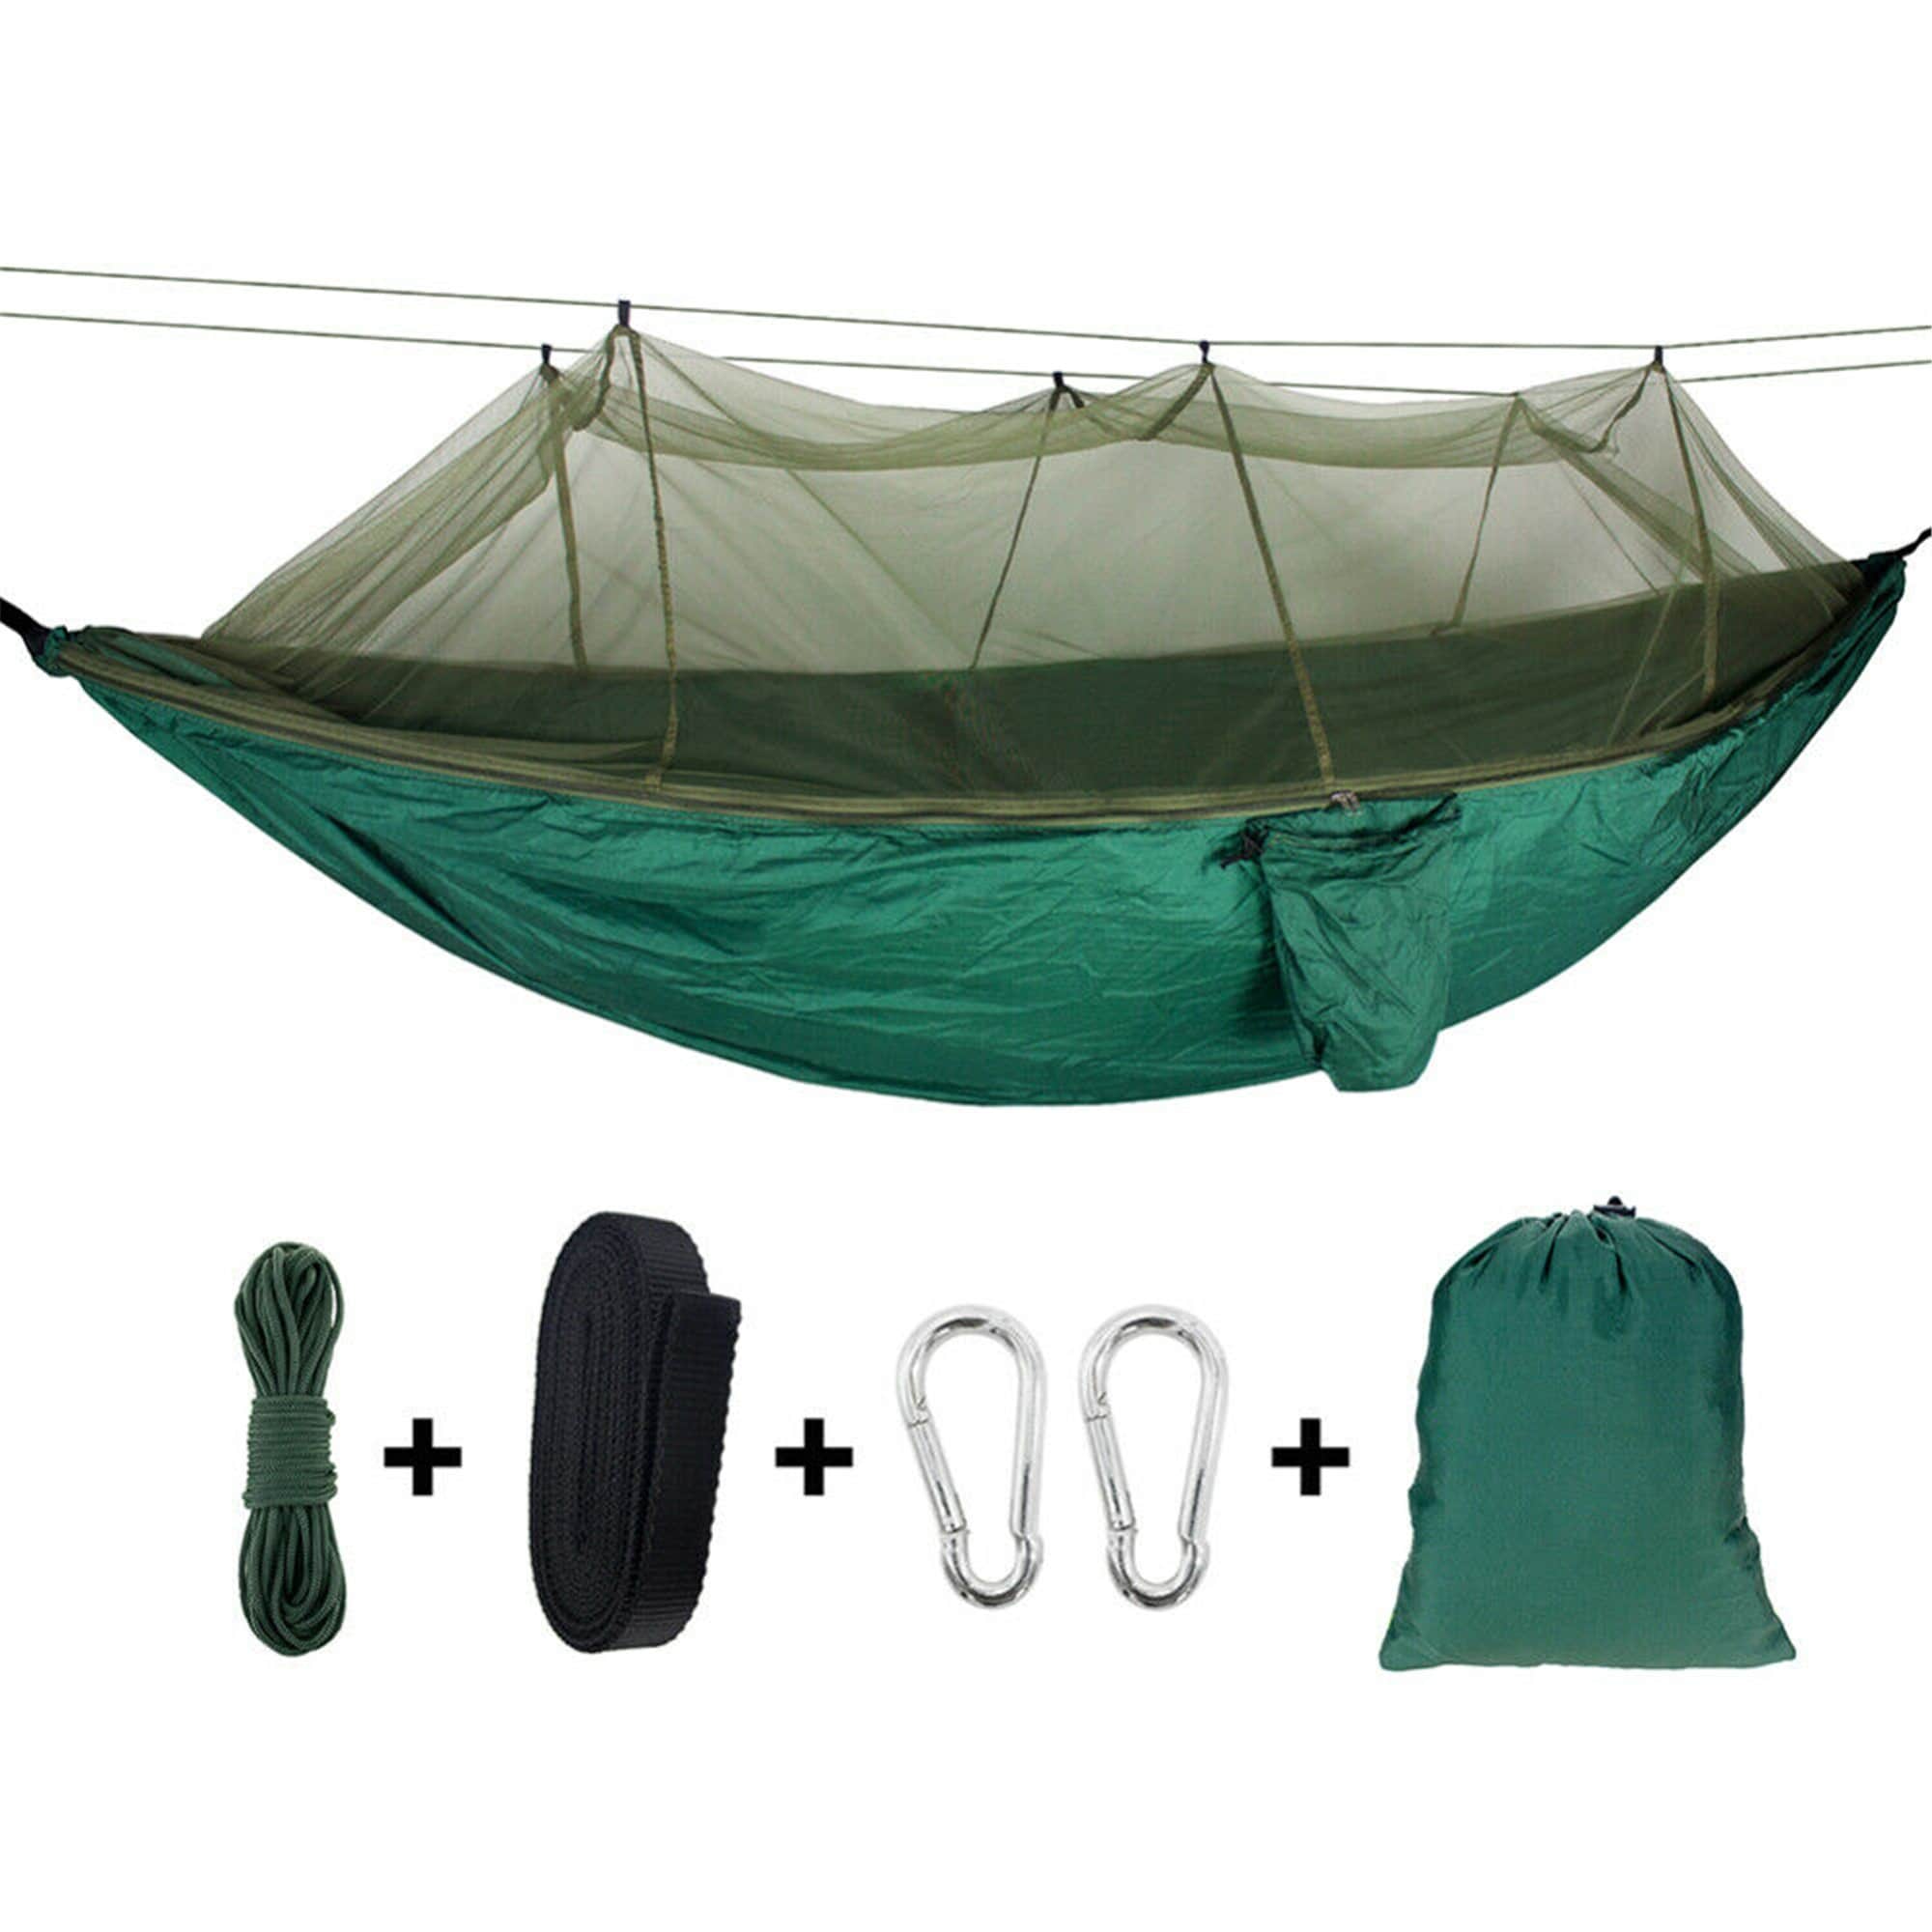 Double Person Travel Outdoor Camping Tent Hanging Hammock Bed W/ Mosquito Net 